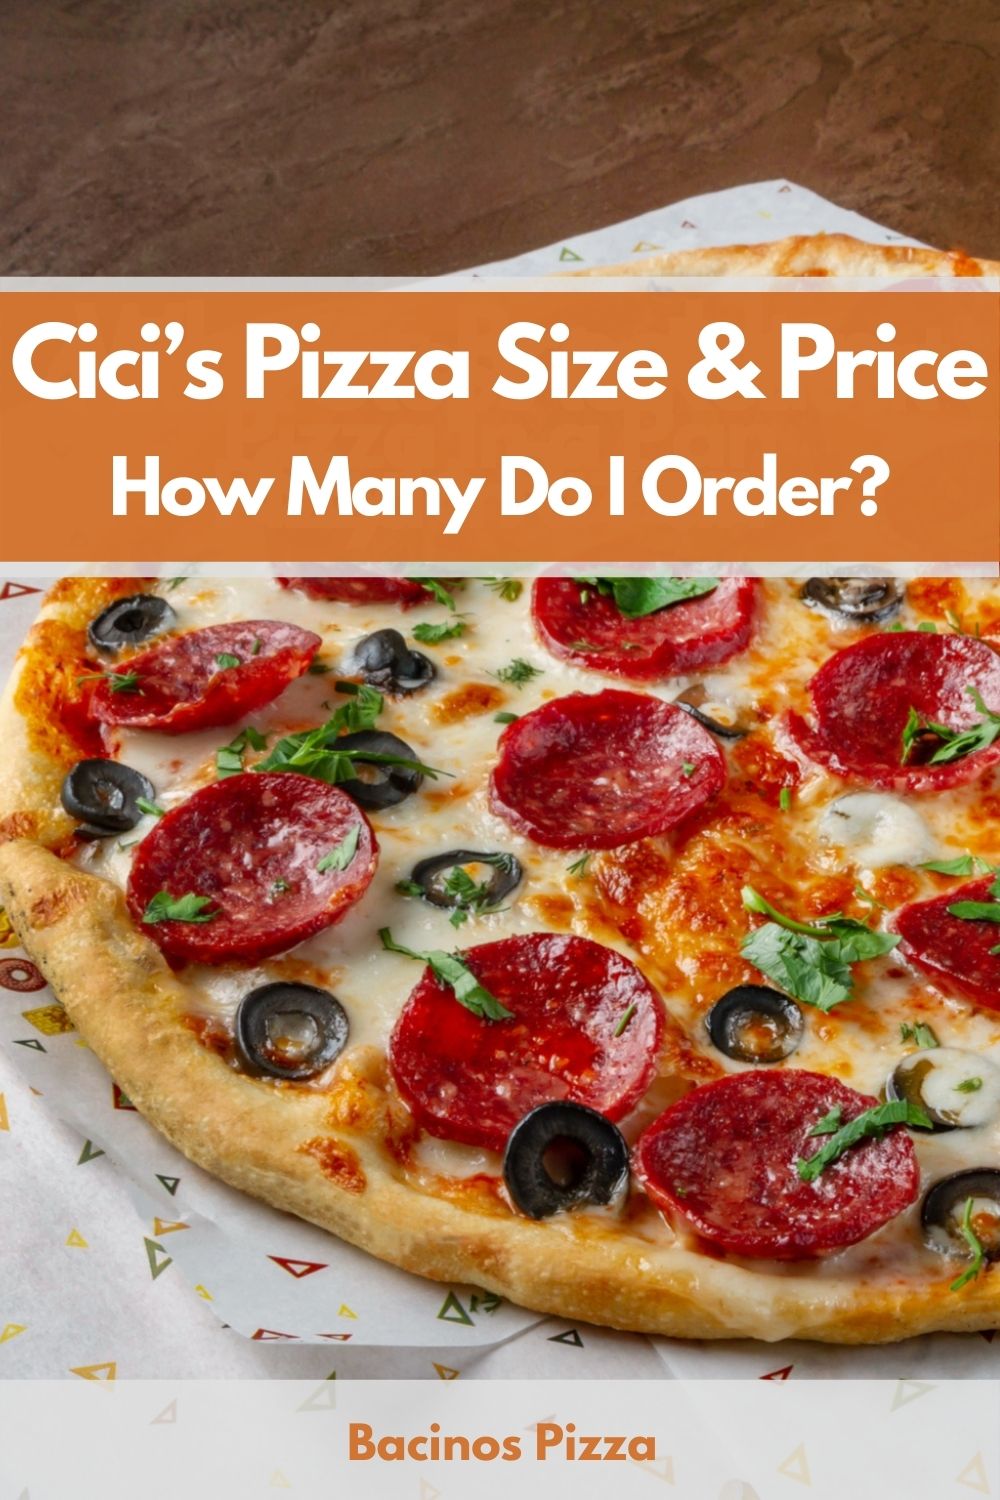 Cici’s Pizza Size & Price How Many Do I Order pin 2